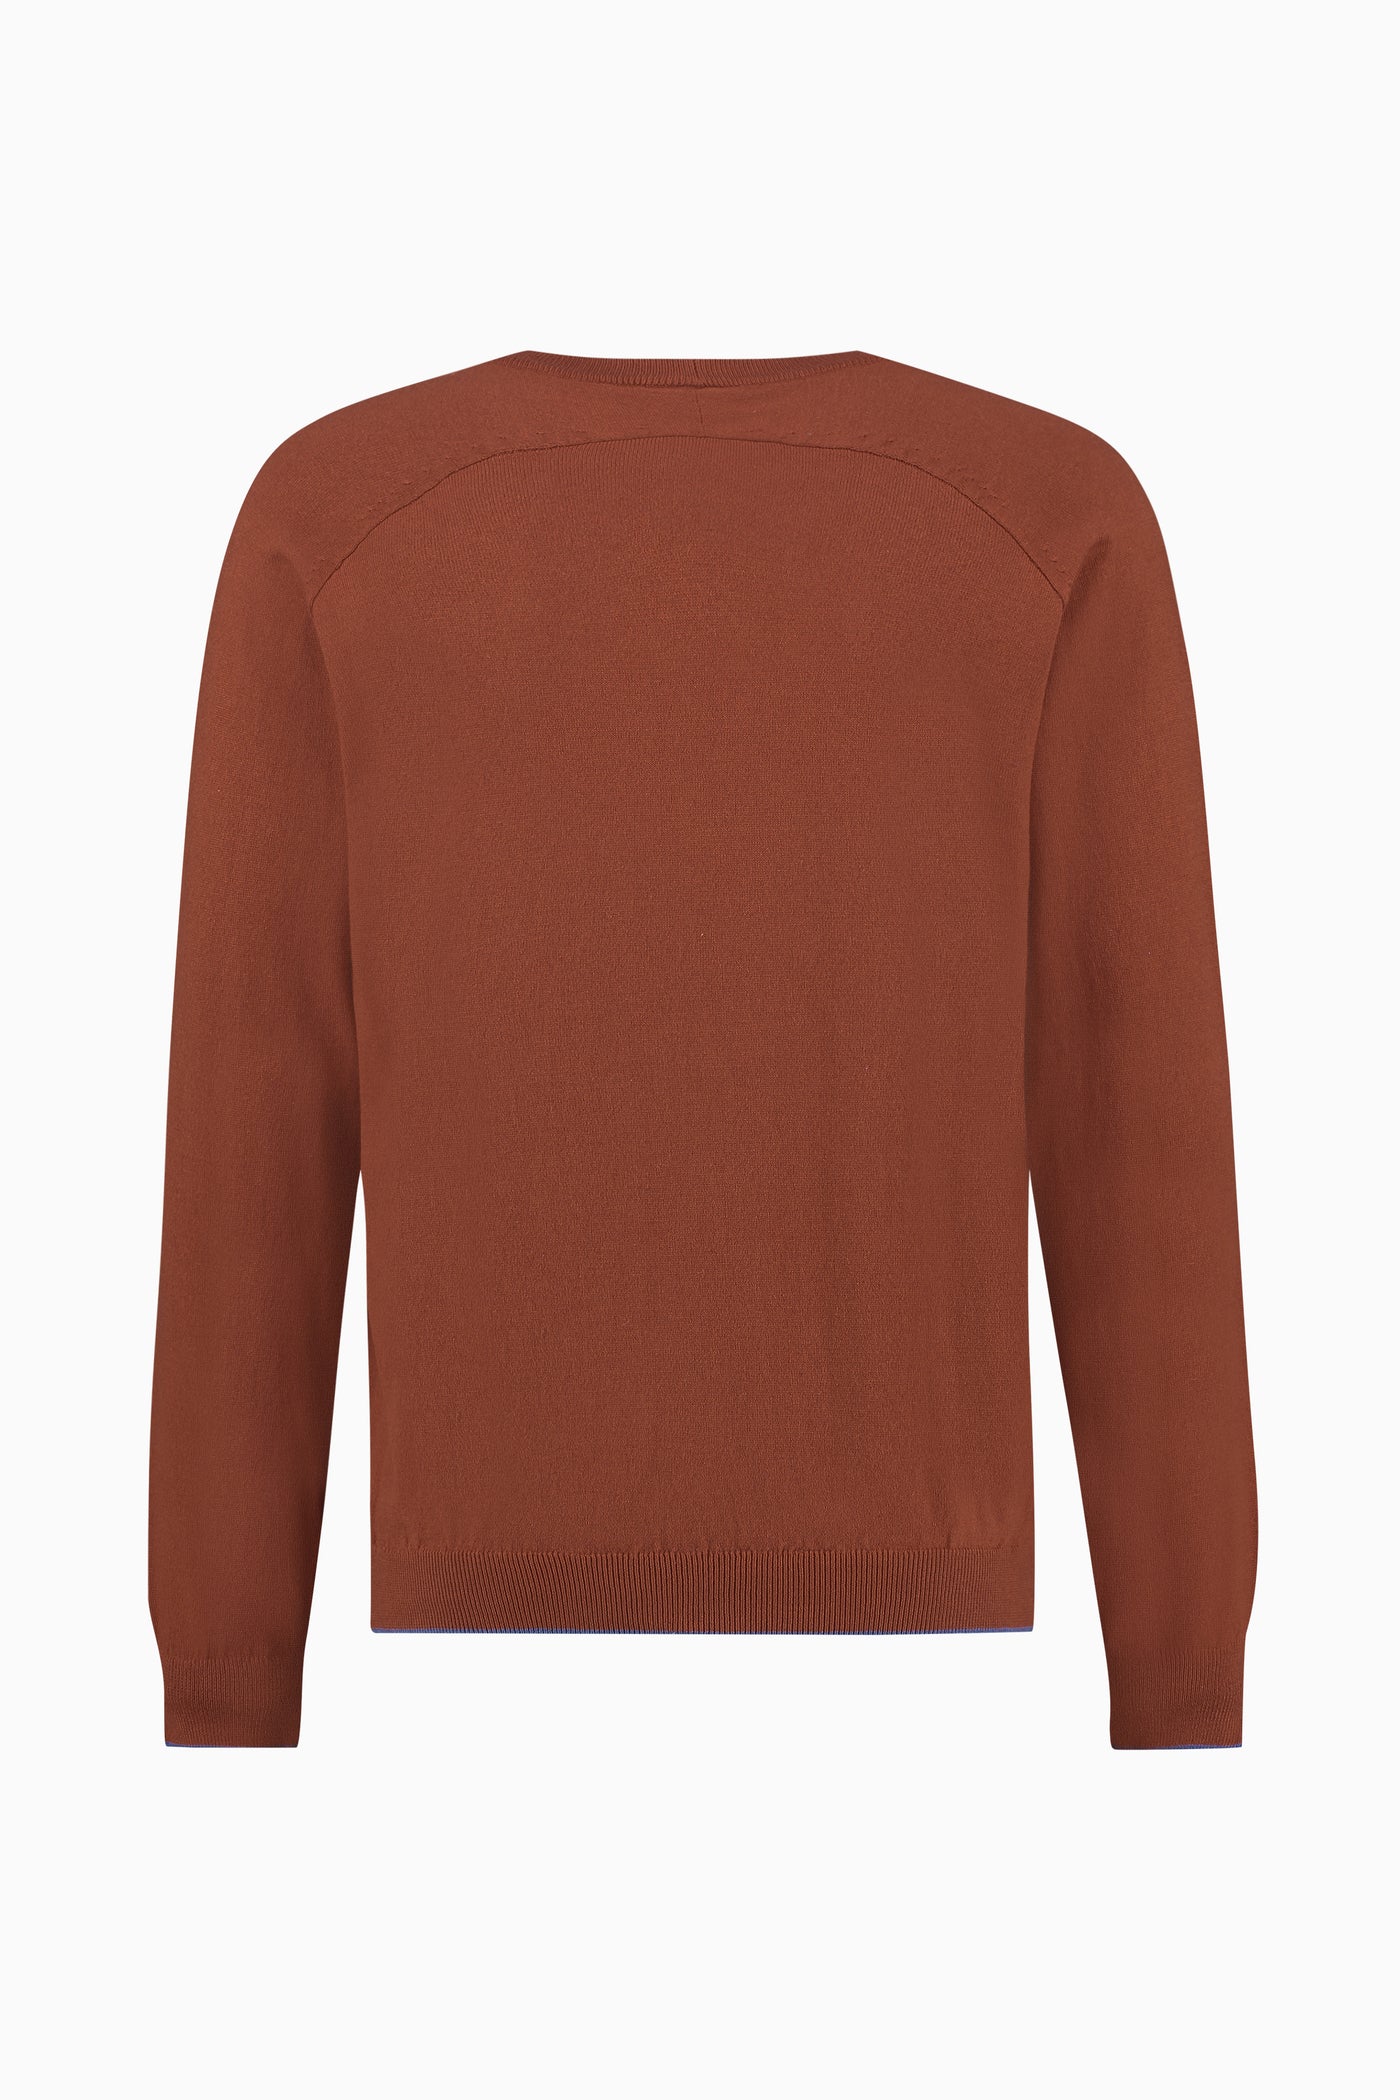 Curved Knit Brown Cotton/Cashmere